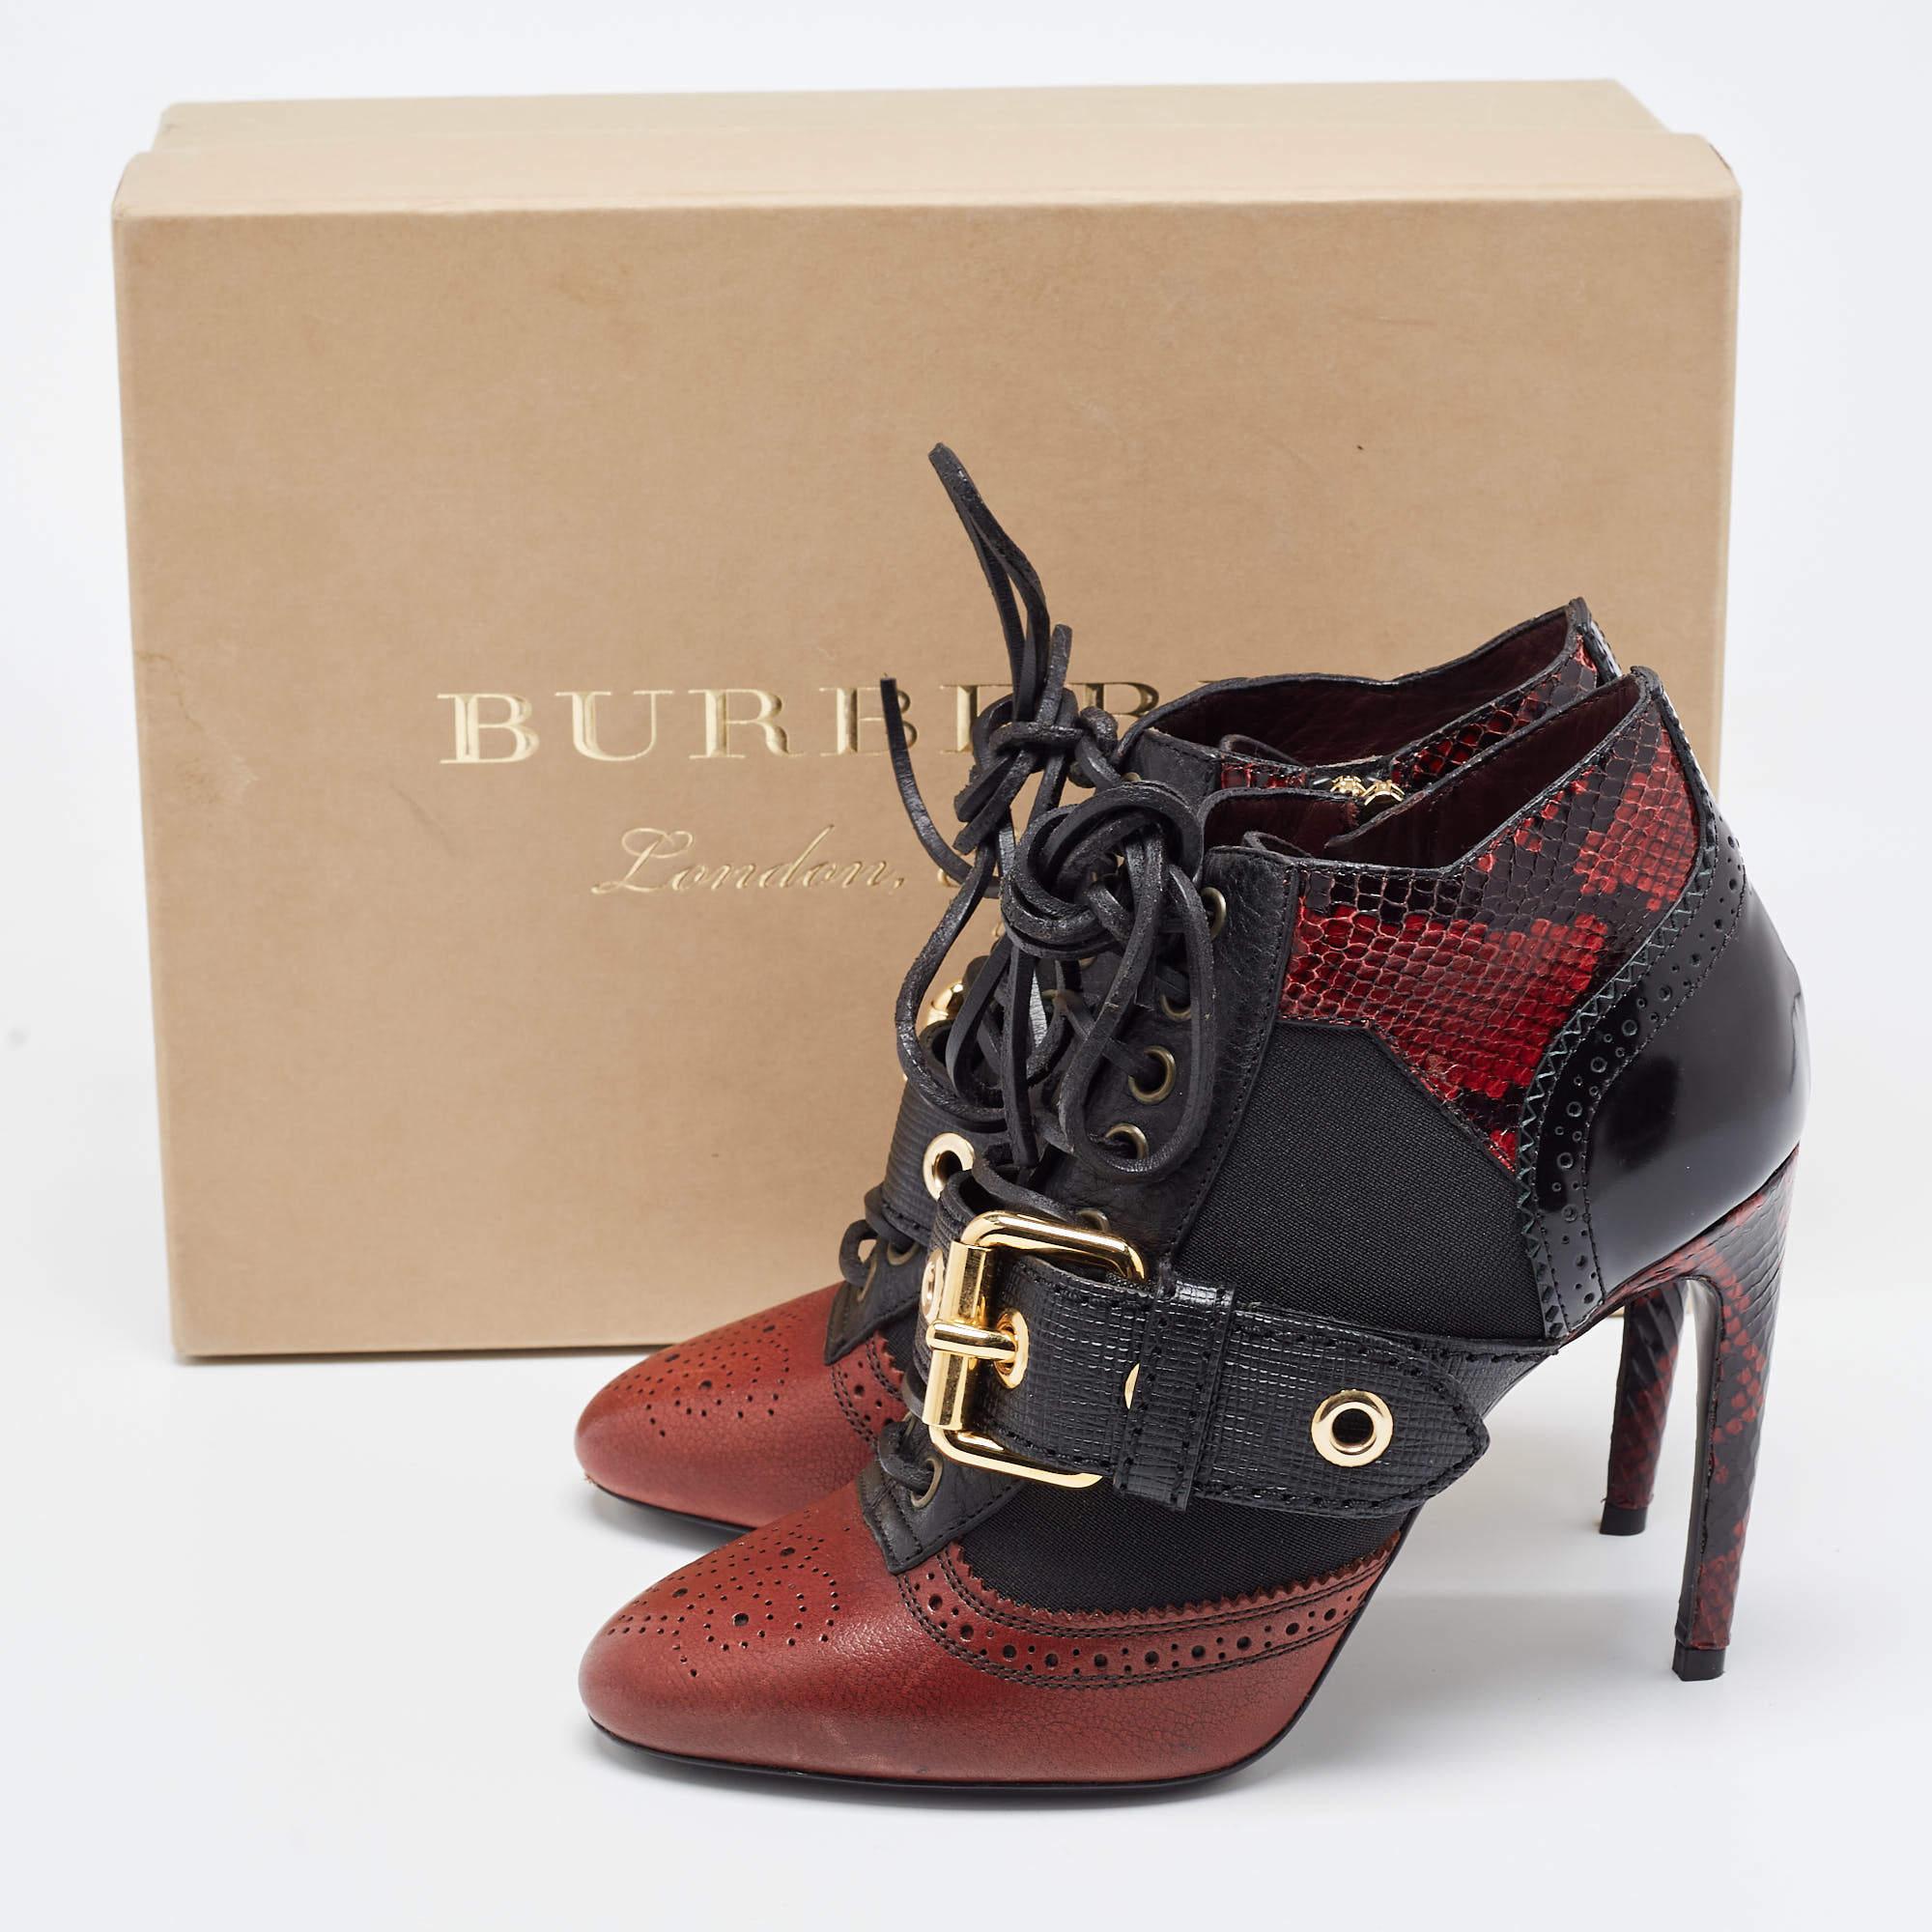 Burberry Black/Burgundy Leather and Python Embossed Westmarsh Buckle Ankle Boots 5